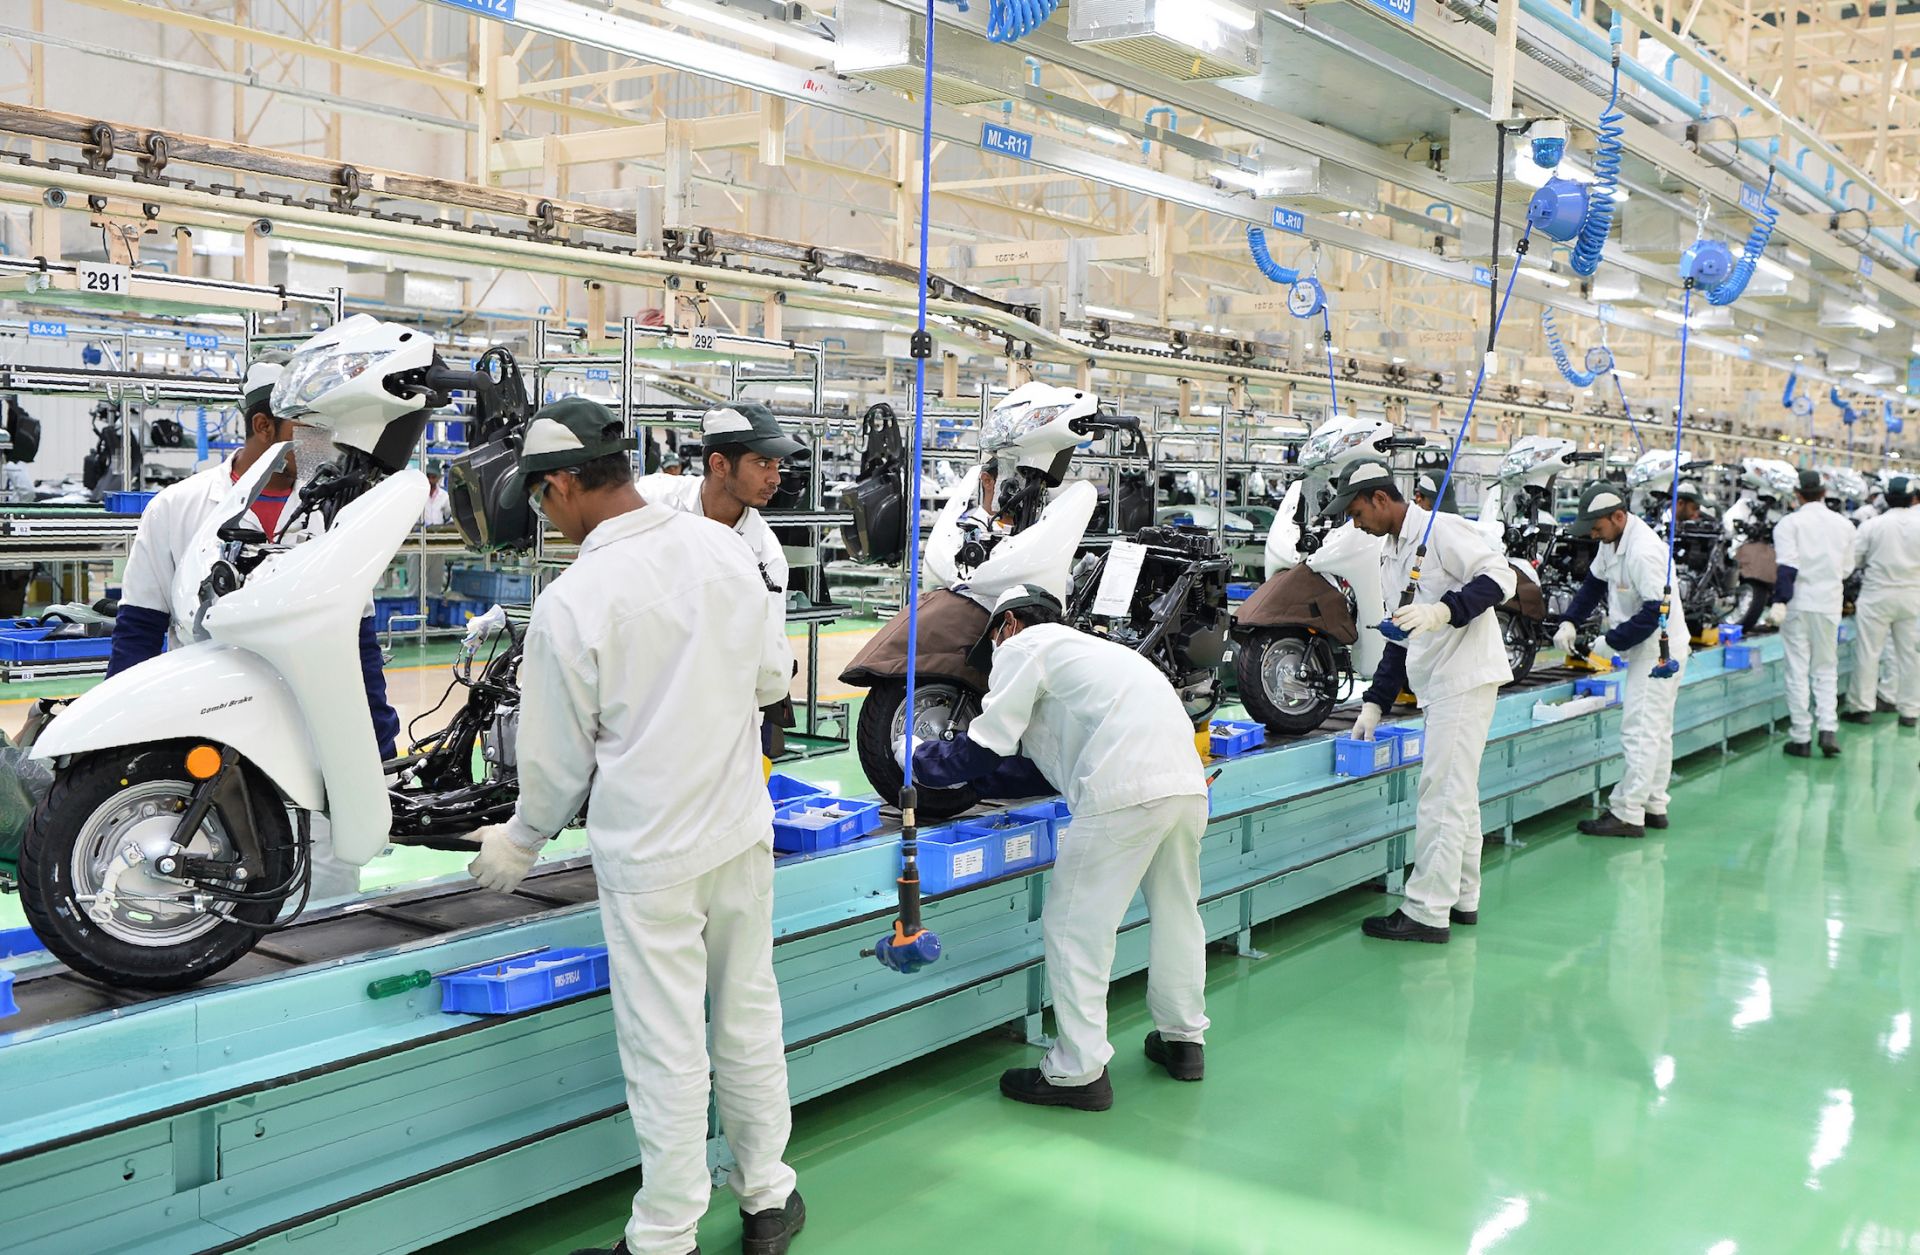 Employees assemble parts and make final inspections of Honda Activa scooters in Narasapura, on the outskirts of Bangalore, India. 